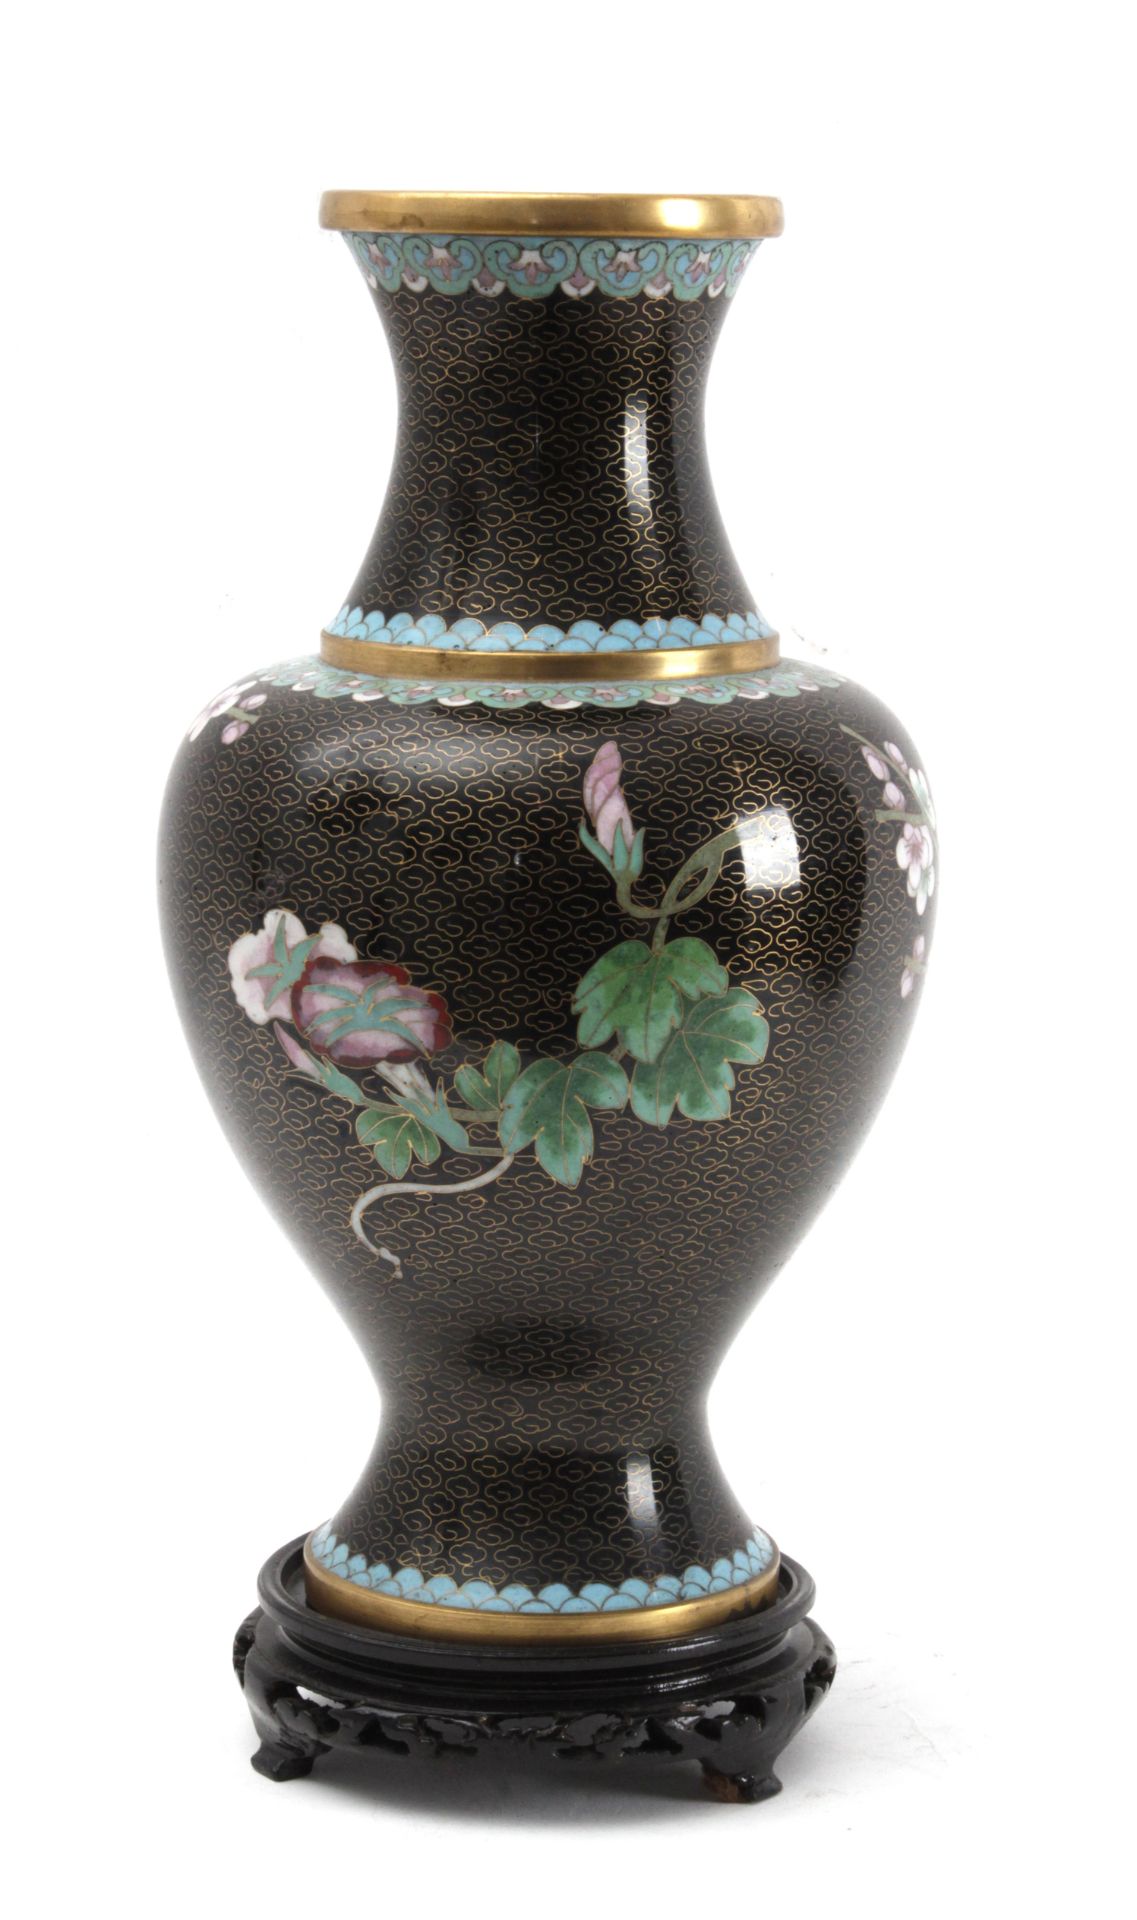 A 20th century Chinese vase in bronze and cloisonné enamel - Image 2 of 4